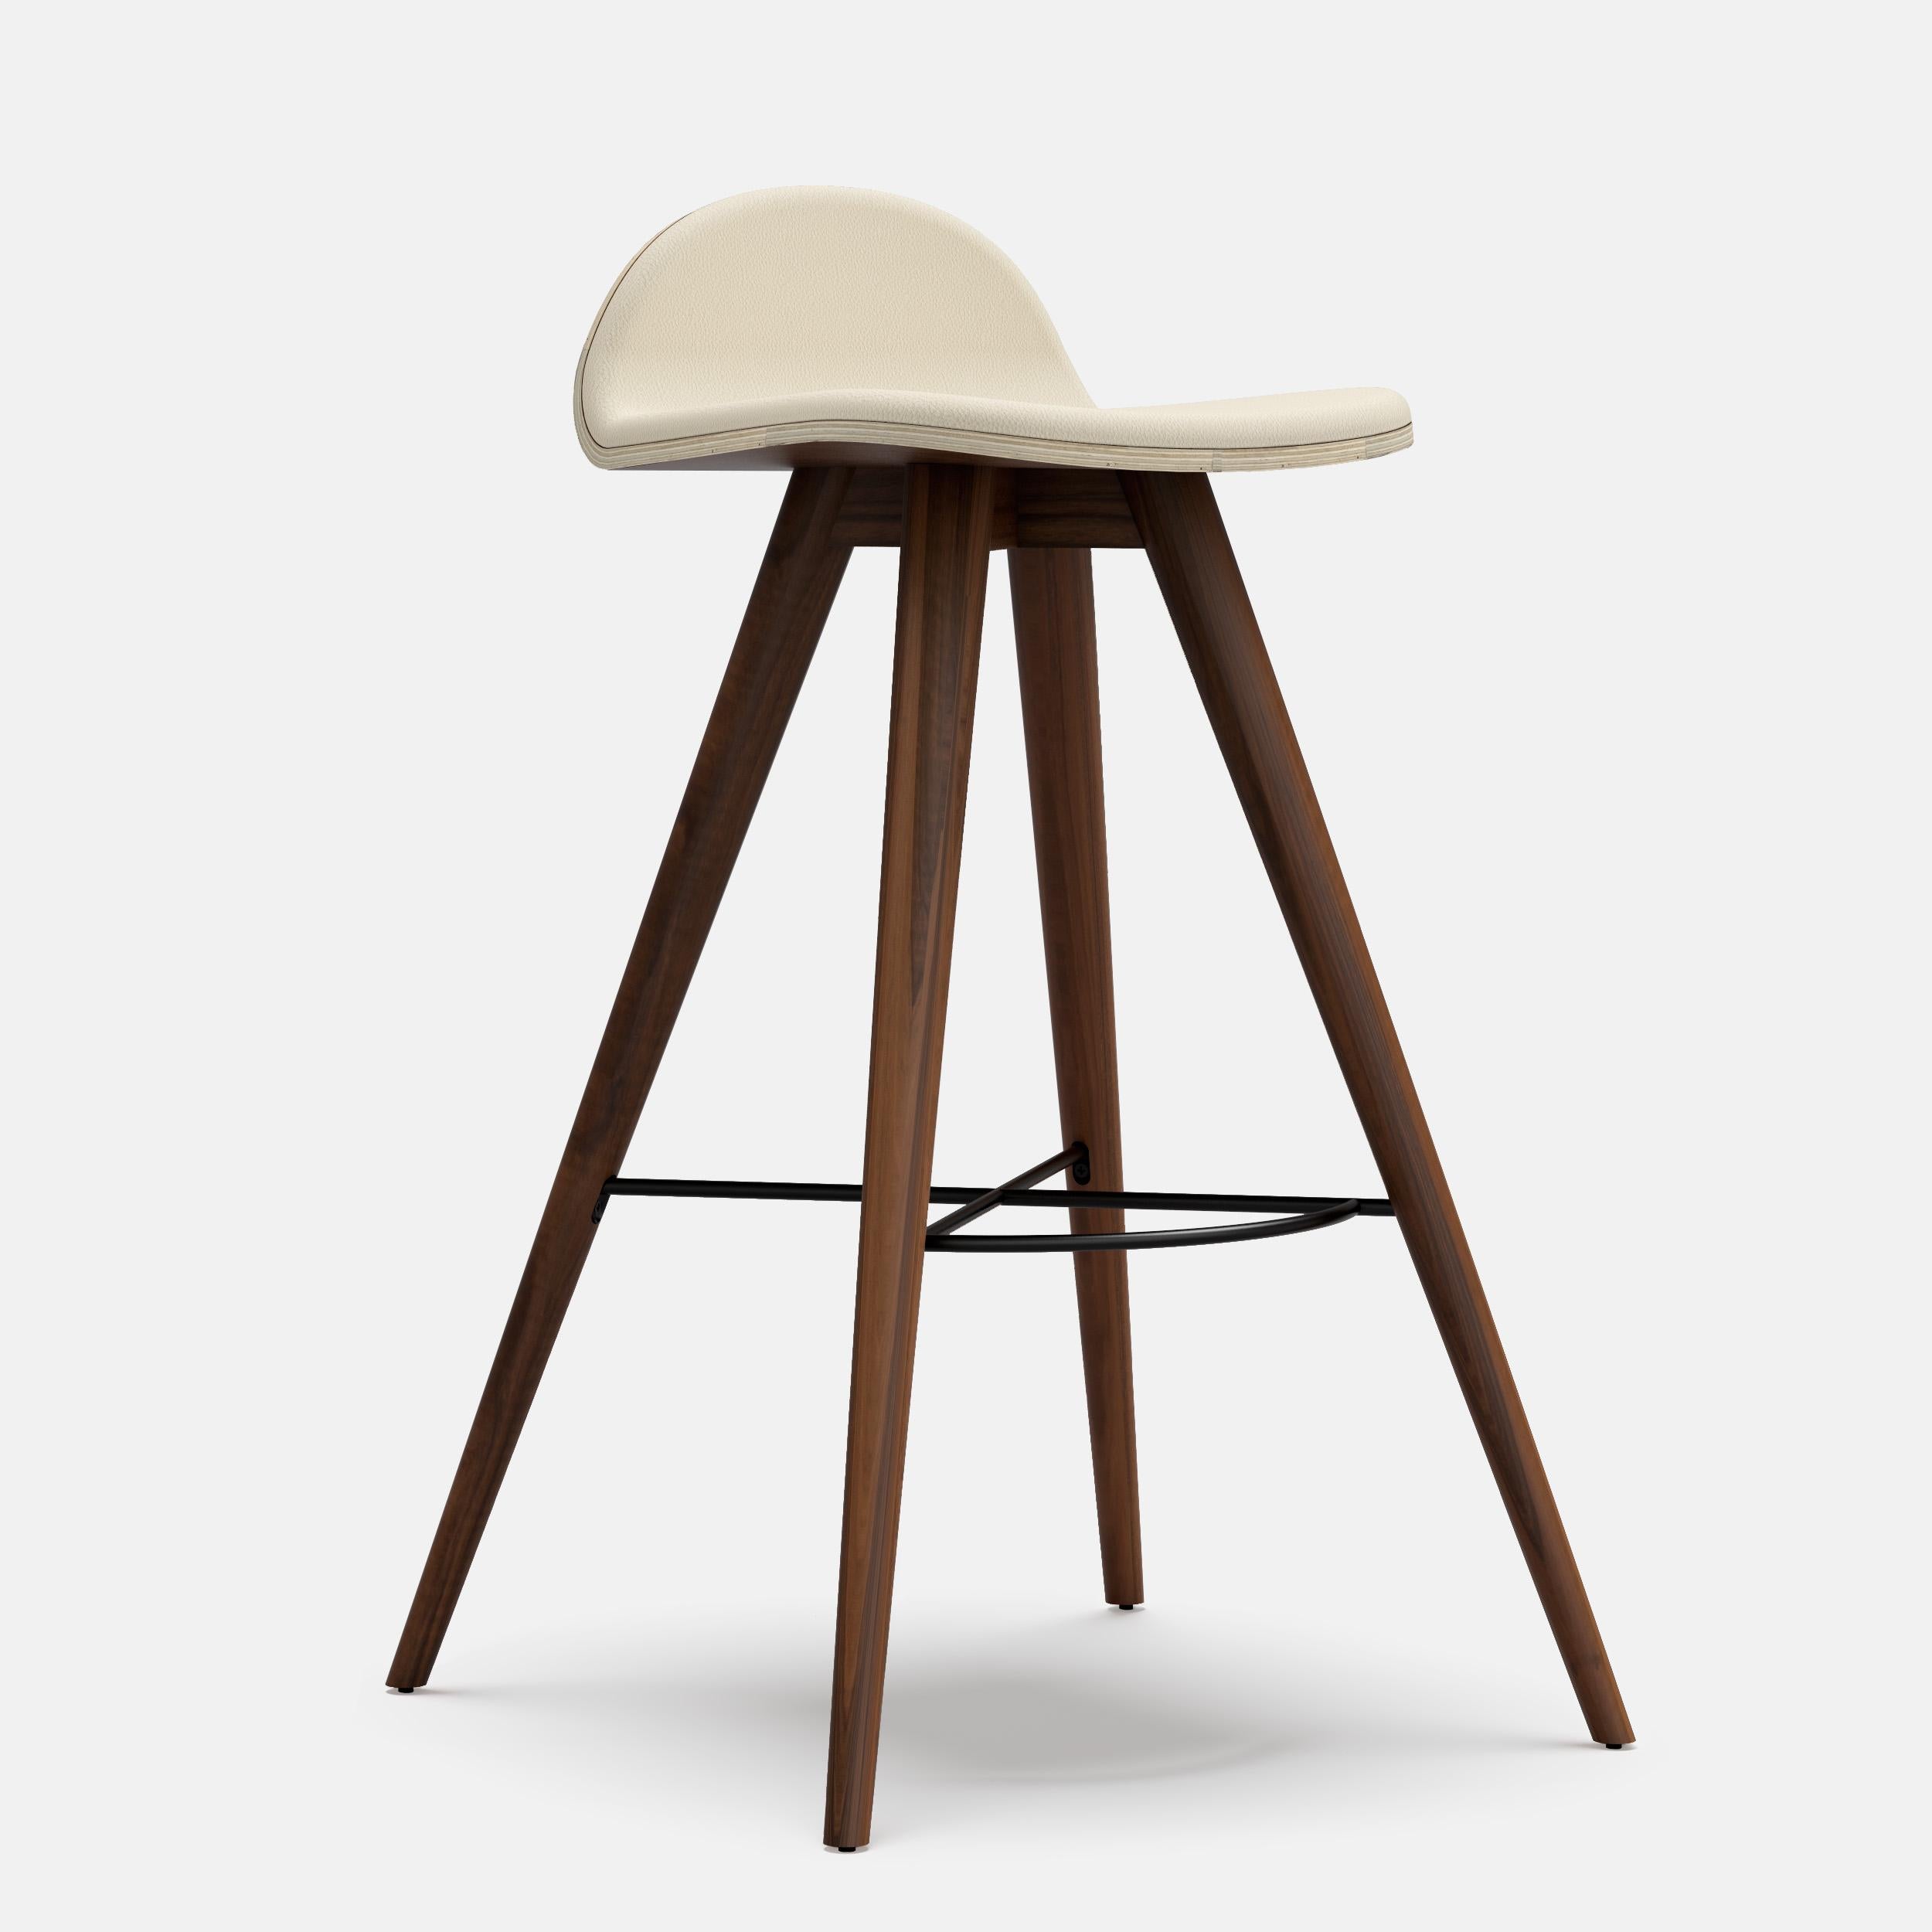 Walnut and fabric contemporary high stool by Alexandre Caldas
Dimensions: W 55 x D 60 x H 100 cm
Materials: American solid walnut, fabric

Structure also available in beech, ash, oak, mix wood
Seat also available in fabric, leather, cork